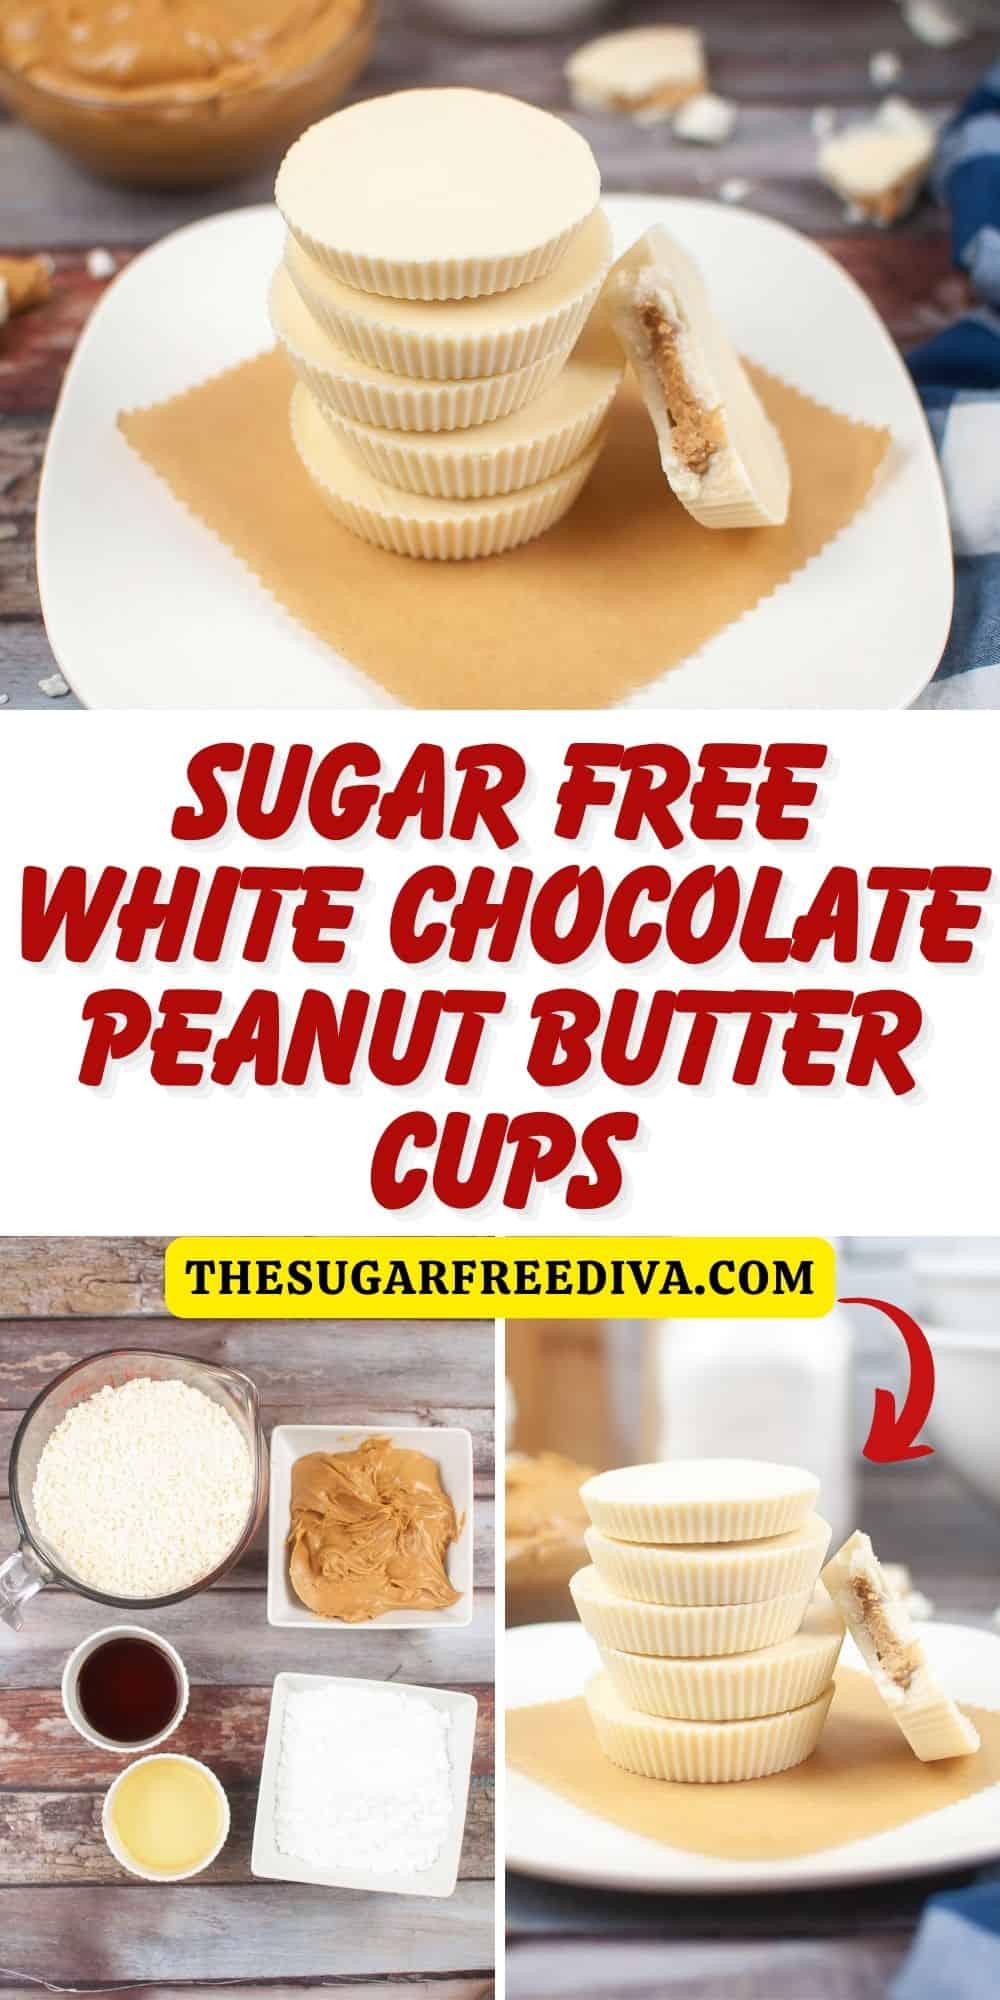 Sugar Free White Chocolate Peanut Butter Cups, an easy recipe for candy or a dessert treat made with no added sugar. Keto Low Carb.